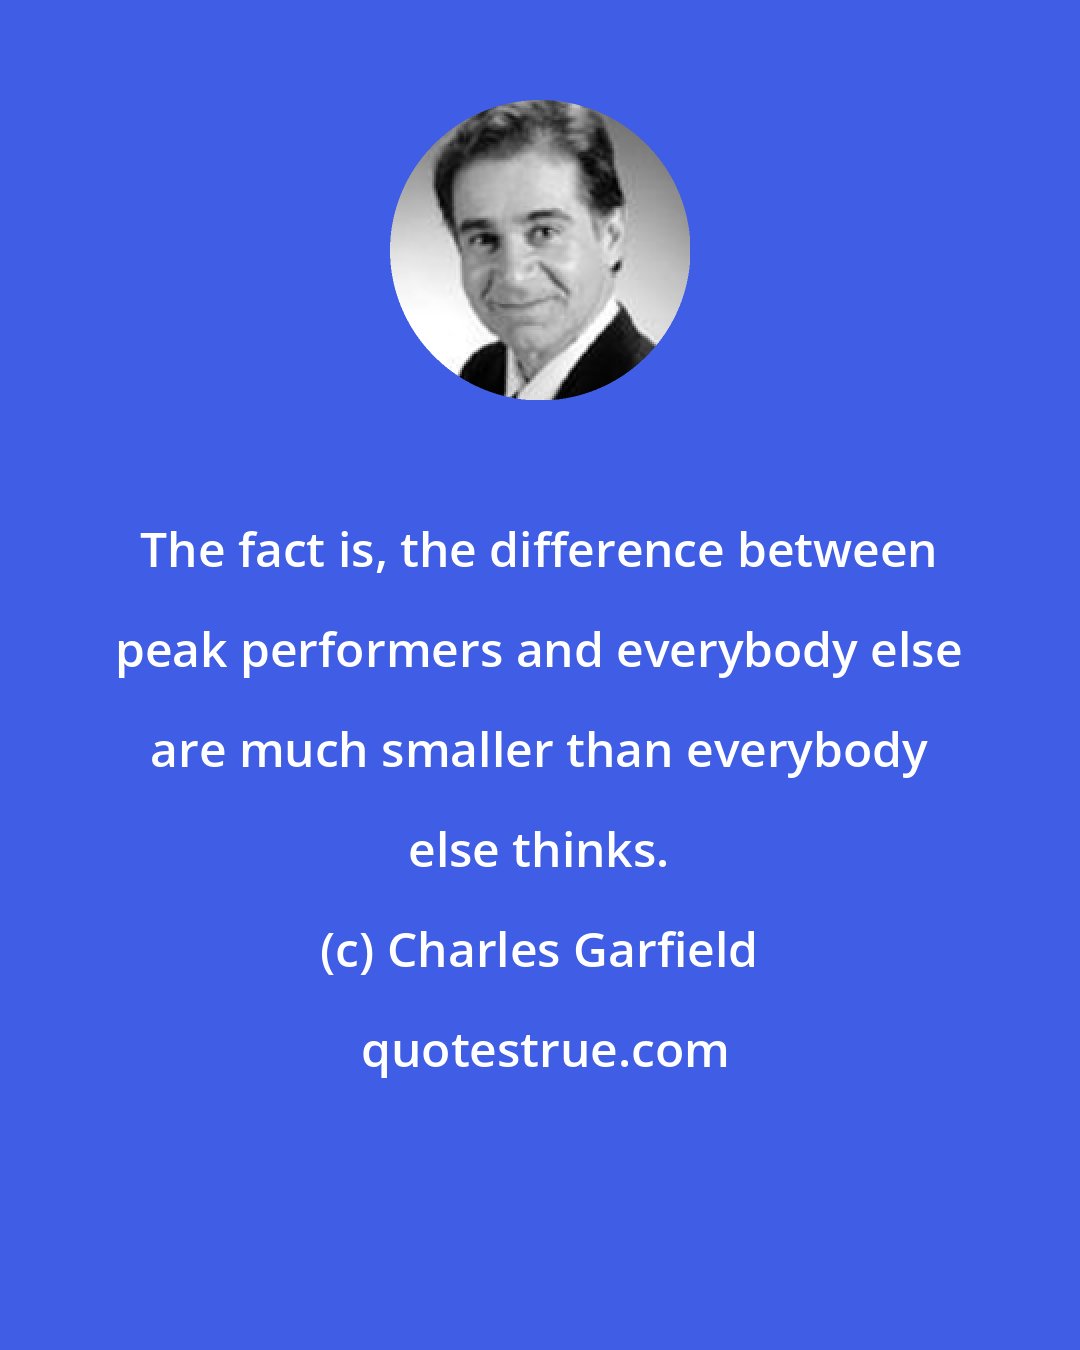 Charles Garfield: The fact is, the difference between peak performers and everybody else are much smaller than everybody else thinks.